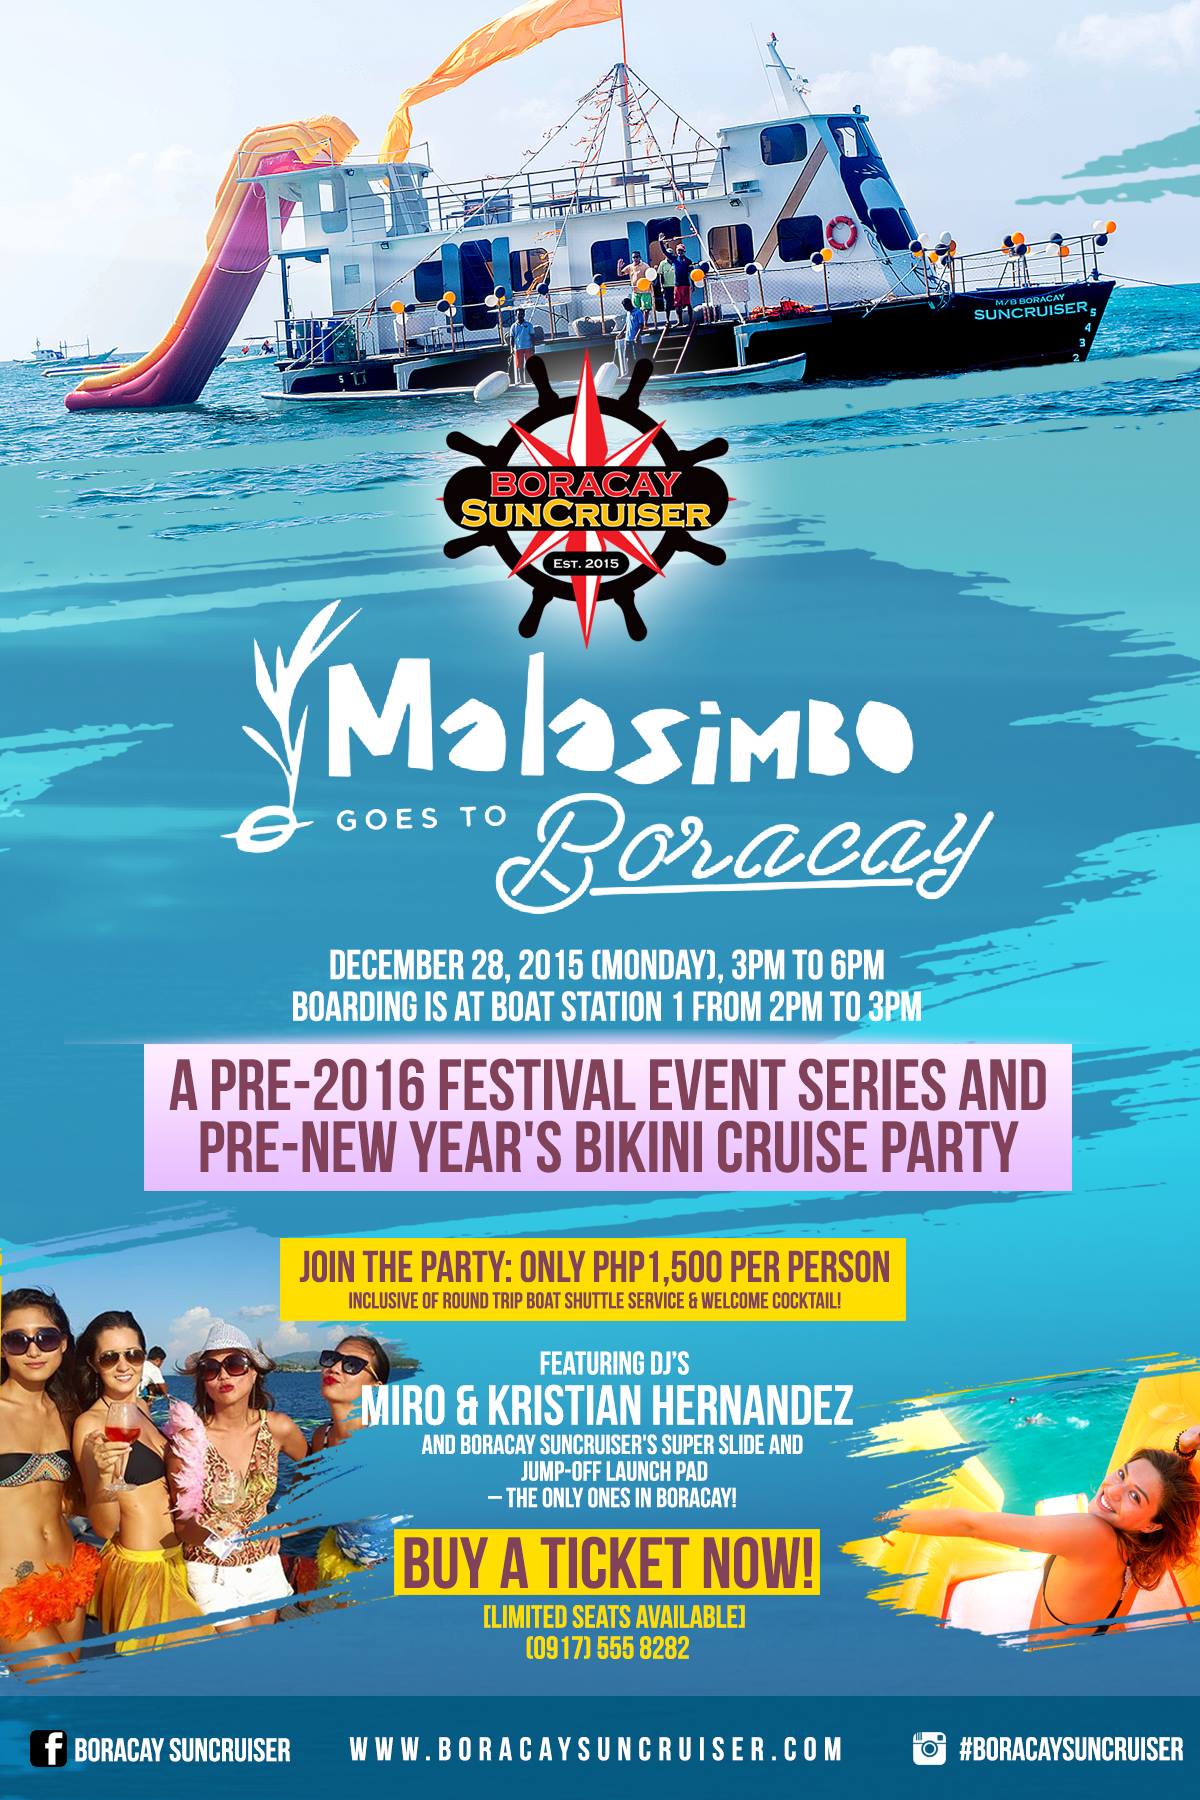 Malasimbo Goes to Boracay clock Tomorrow at 3 PM - 6 PM Tomorrow · 84°F / 77°F Partly Cloudy pin Show Map Boracay SunCruiser Balabag, Boracay Island, 5608 Malay, Aklan ticket Find Tickets Tickets Available www.boracaysuncruiser.com ALL ABOARD the Boracay SunCruiser - Boracay's Ultimate Pleasure Party Boat! Join us on Monday (December 28) for our PRE-NEW YEAR BIKINI CRUISE PARTY and the Malasimbo Music & Arts Festival's “MALASIMBO GOES TO BORACAY” Pre-2016 Festival Event Series, from 3pm to 6pm! *Boarding is at Boat Station 1 (from 2pm to 3pm) ONLY PhP1,500 per person: Inclusive of round trip boat shuttle service & welcome cocktail! Featuring DJs MIRO & KRISTIAN HERNANDEZ and the Boracay SunCruiser SUPER SLIDE and JUMP-OFF LAUNCH PAD – the only ones in Boracay! *BUY A TICKET NOW [Limited seats available]: (0917) 555 8282 www.boracaysuncruiser.com Together with the Philippine Chamber of Commerce and Industry - Boracay, the event series features Malasimbo's very own Miro Grgic, Kristian Hernandez, June Marieezy & Marcus Salcedo Maguigad as they bring you 5 days of #MalasimboMagic through their powerful music. Happening from December 27- 31st, the pre-2016 festival event series aims to raise awareness for Four Boracay Advocacies: Friends of the Flying Foxes, Red Cross Youth, Mangrove Reforestation & Coral Reef Reforestation. Part of the proceeds will go to supporting these causes, so this is your chance to CRUISE & GIVE BACK to BORACAY! So take your revel to the next level, get off the tourist traps and join us for some good music and the time of your life aboard the Boracay SunCruiser that promises to be off the charts! LET THE GOOD TIMES ROLL! Please "Like" & Share, and see you there! Invite your friends to be part of a new movement towards environmental awareness through music and collaborations. #boracaysuncruiser #BoracaysUltimatePleasurePartyBoat #MalasimboGoestoBoracay #Malasimbo2016